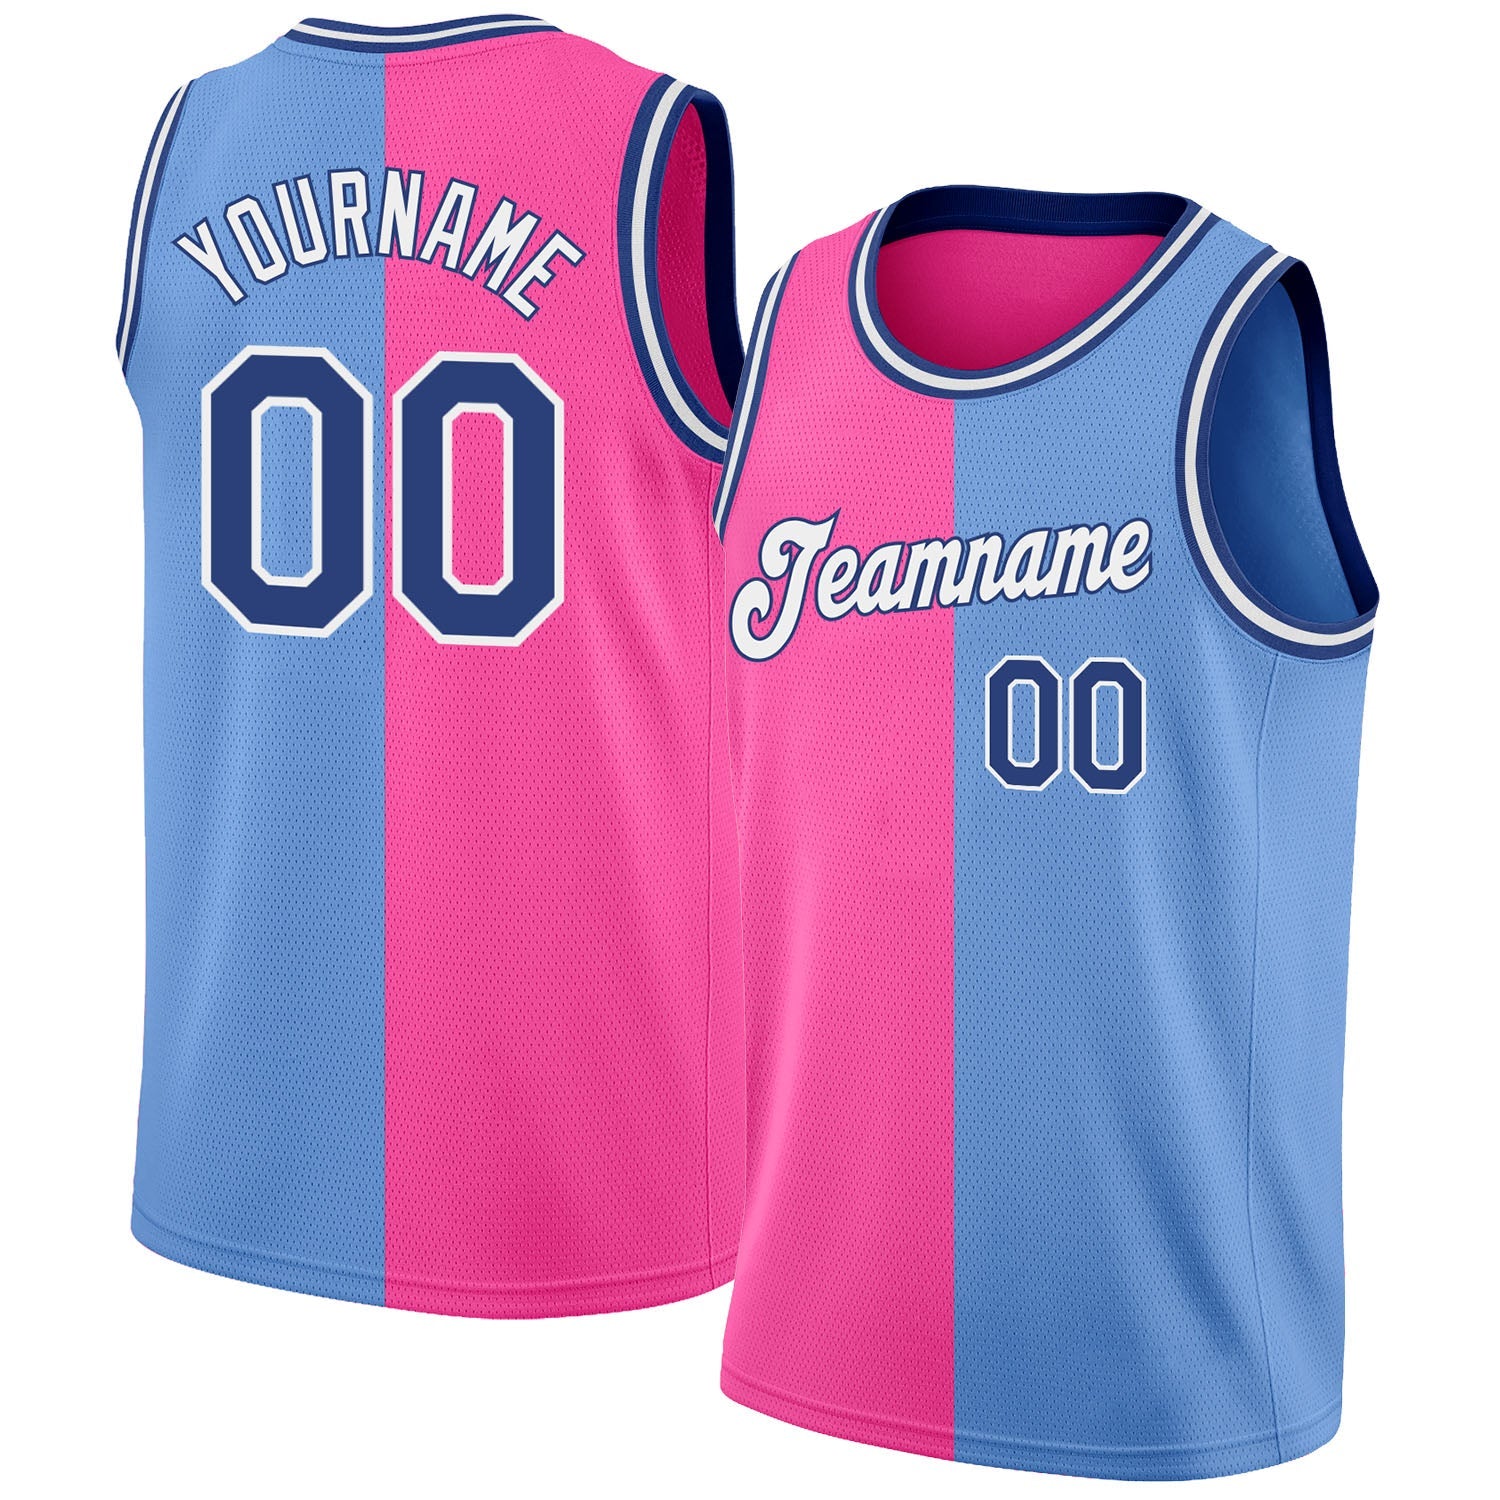 BLUE SLOVENIA 01 BASKETBALL JERSEY FREE CUSTOMIZE OF NAME&NUMBER